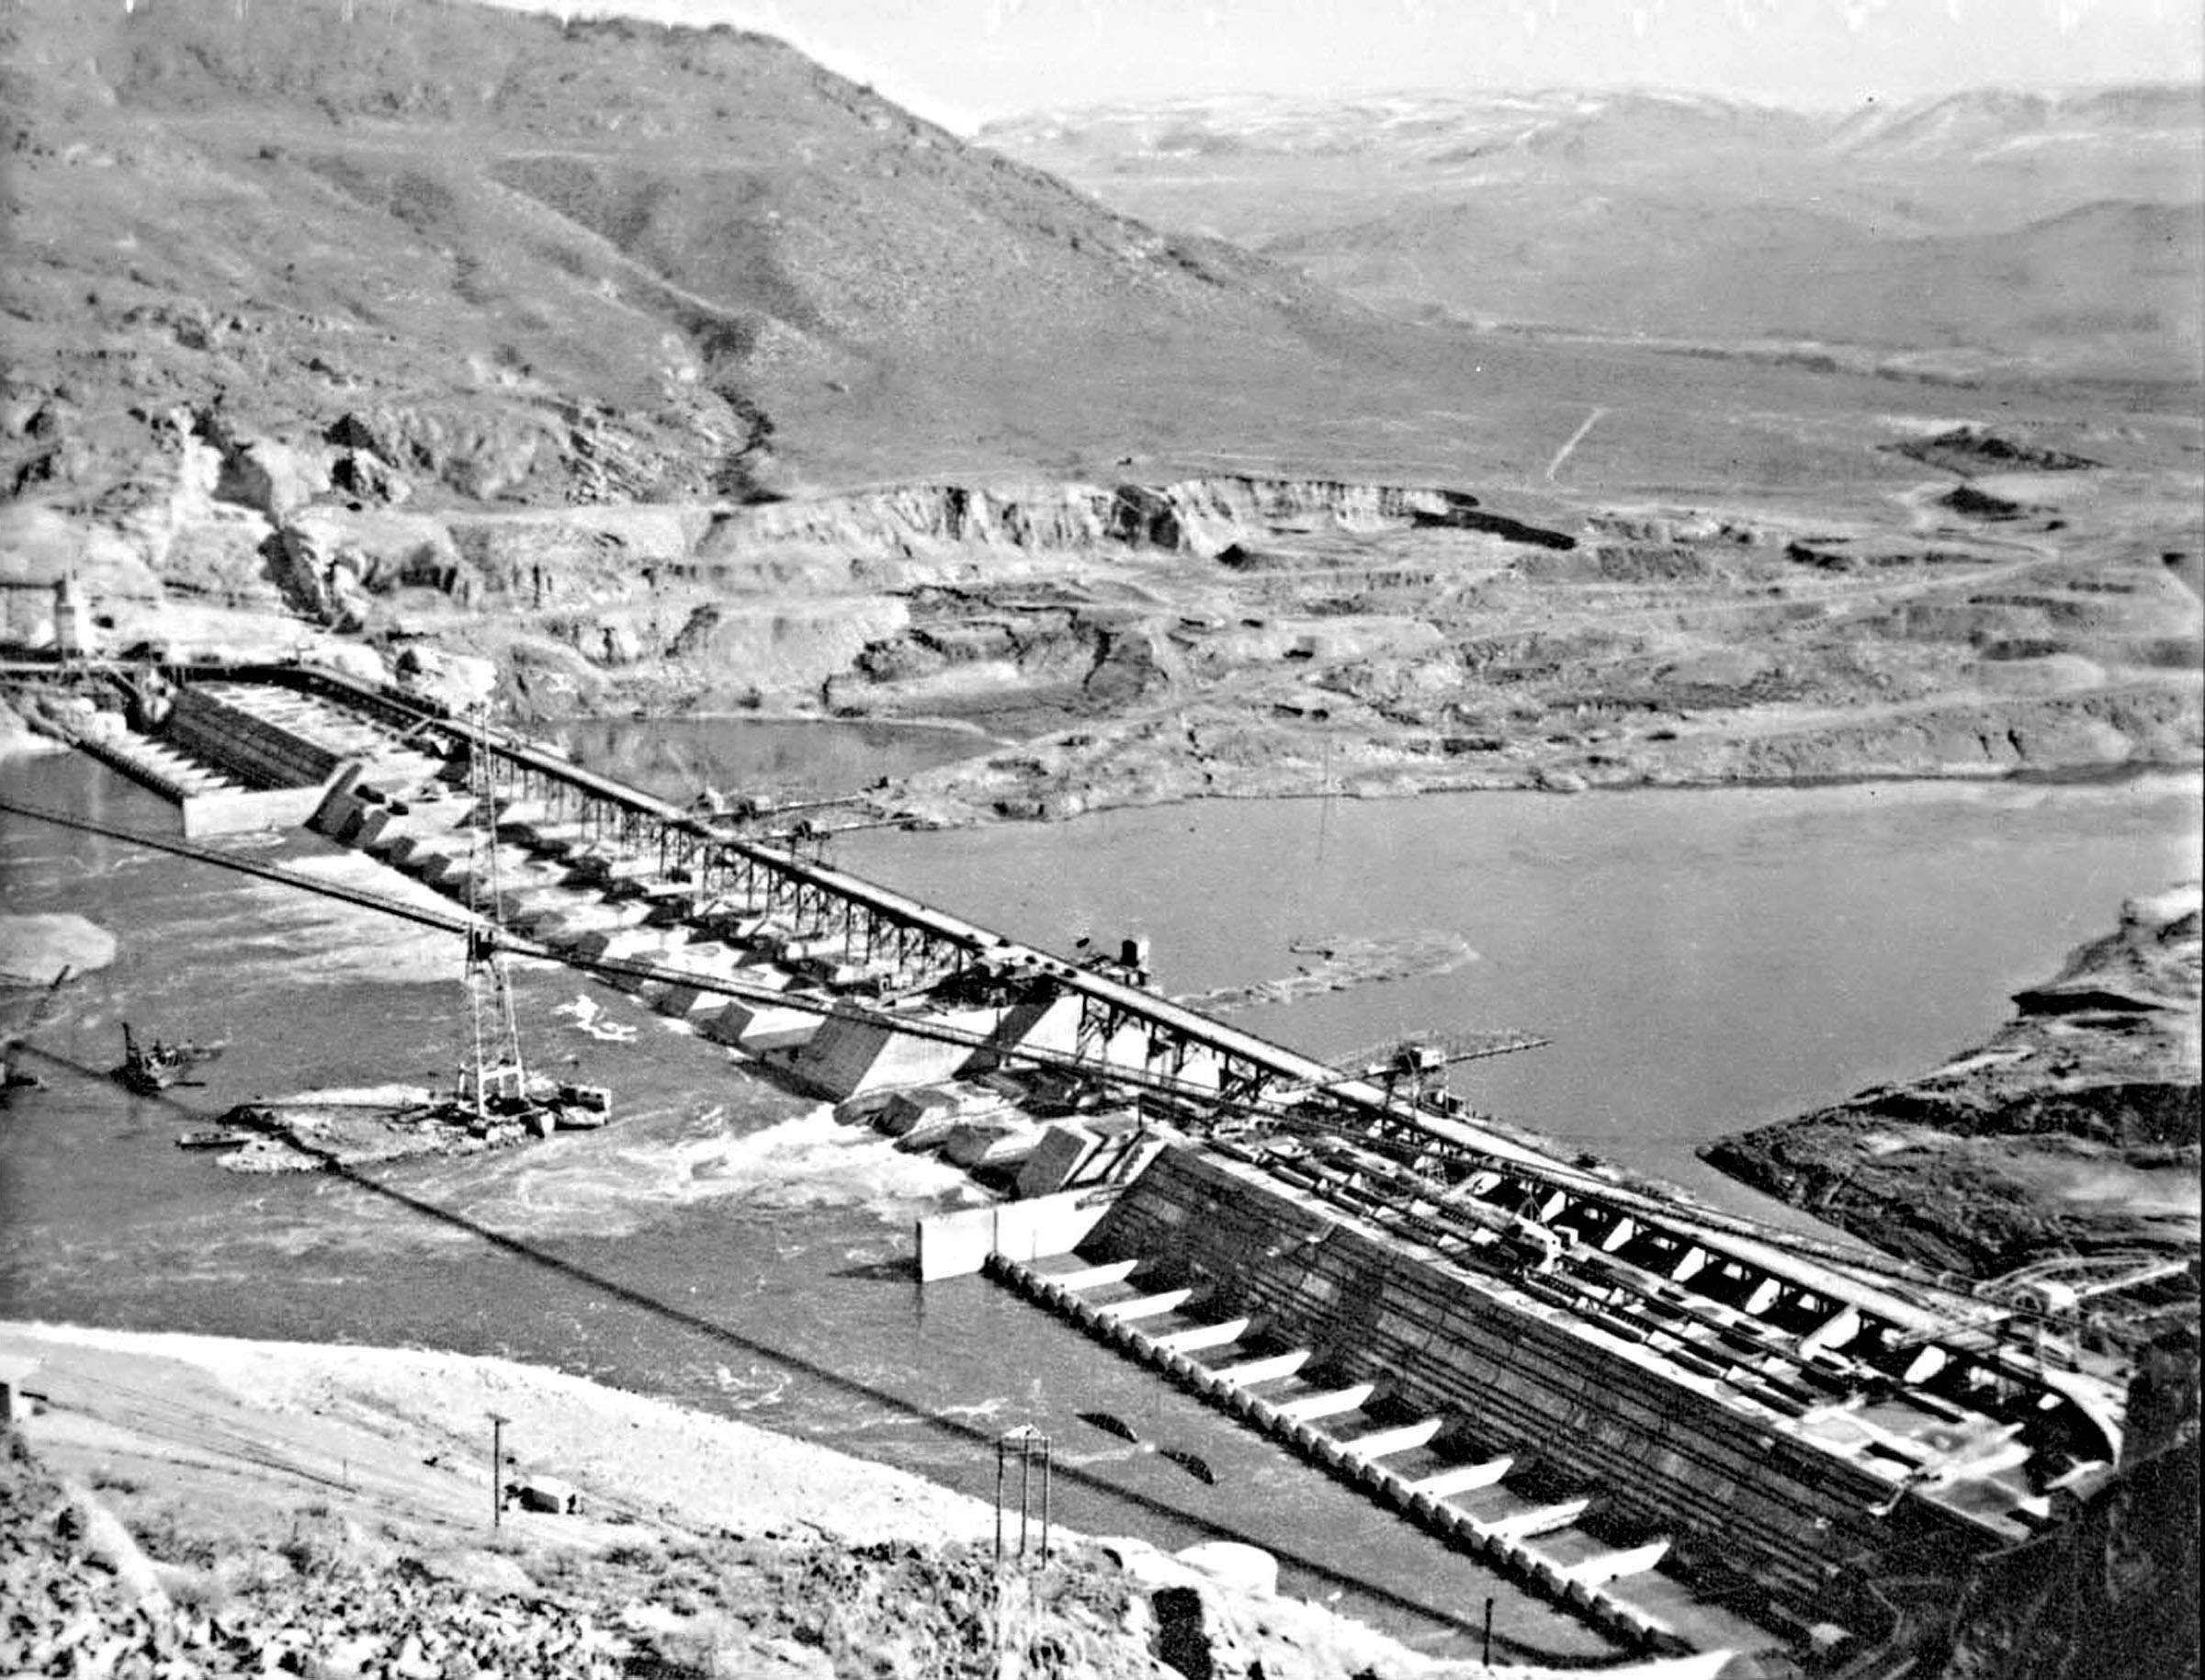 Photo taken March 8, 1938. Looking east from Fiddle Creek area at Grand Coulee Dam at the close of M.W.A.K. contract.